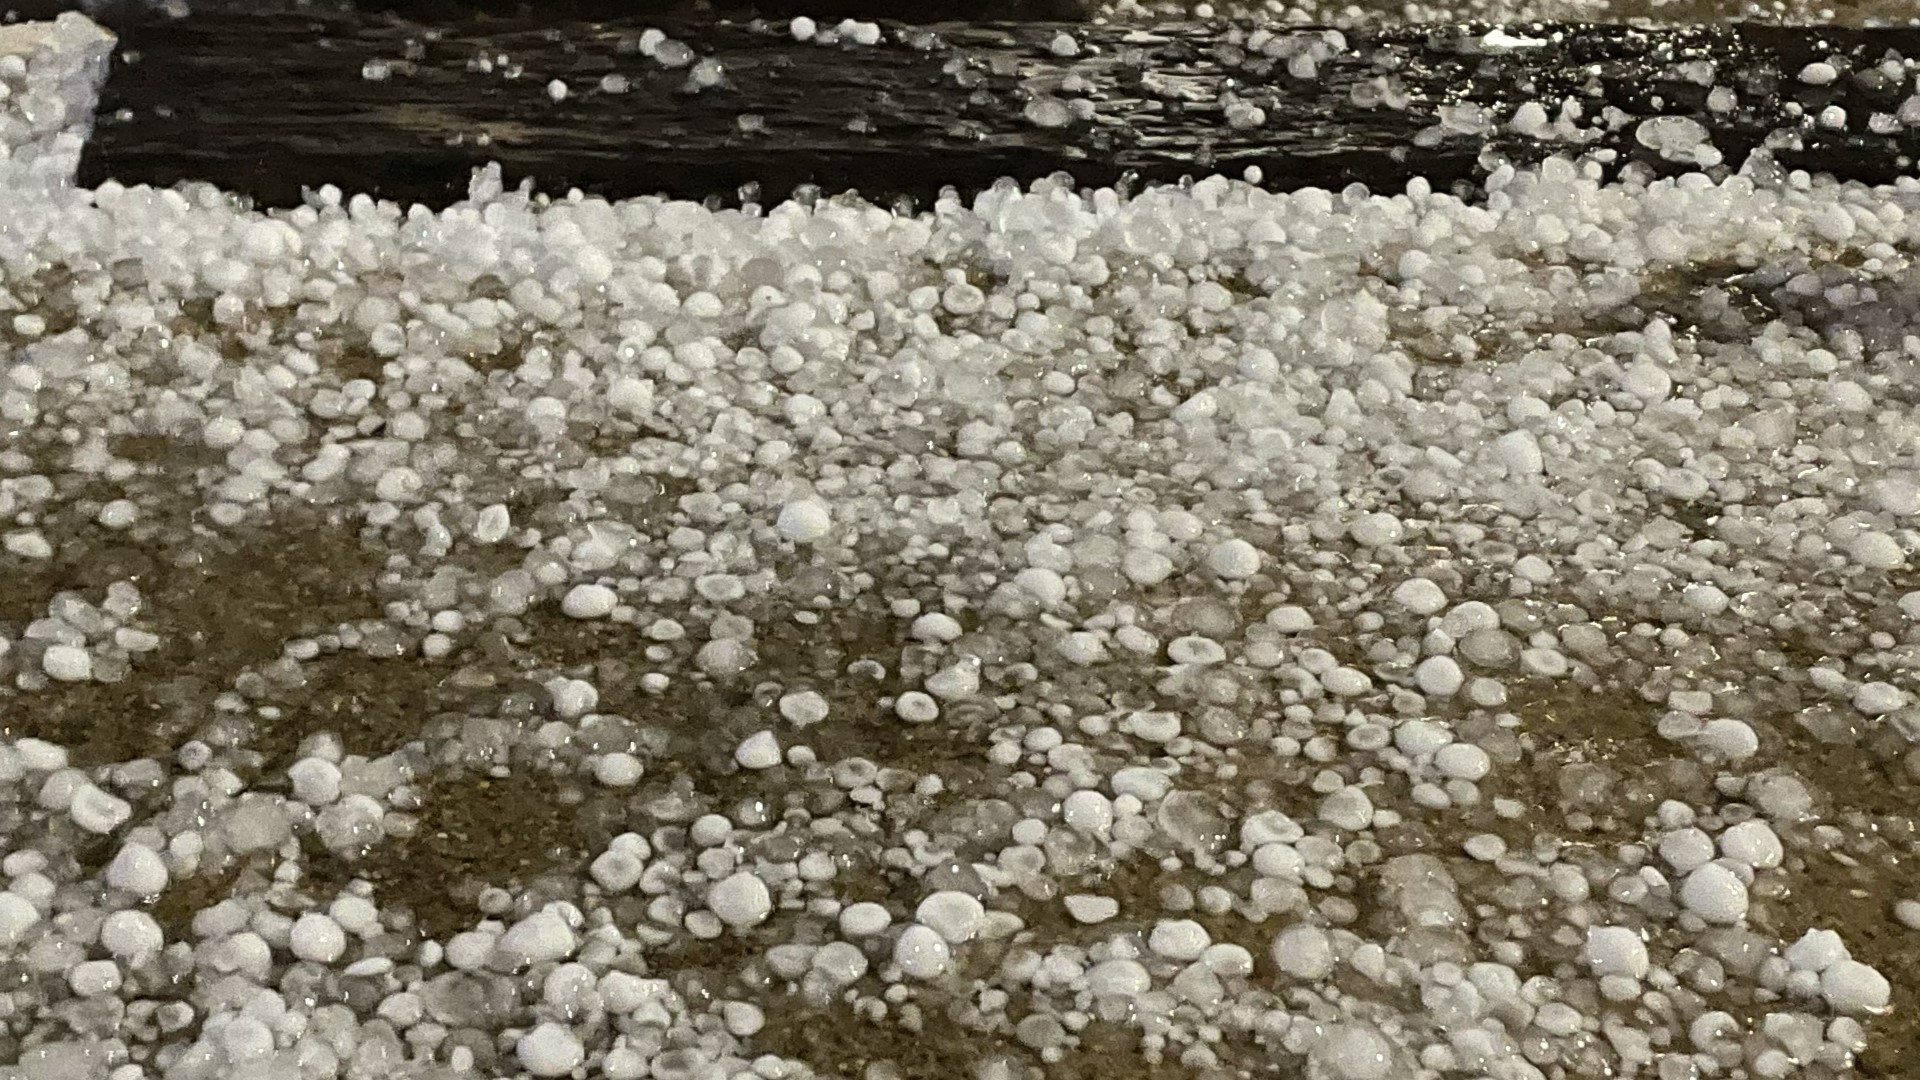 Auto body shop, car dealership take action after recent hail that damaged East Texans' vehicles